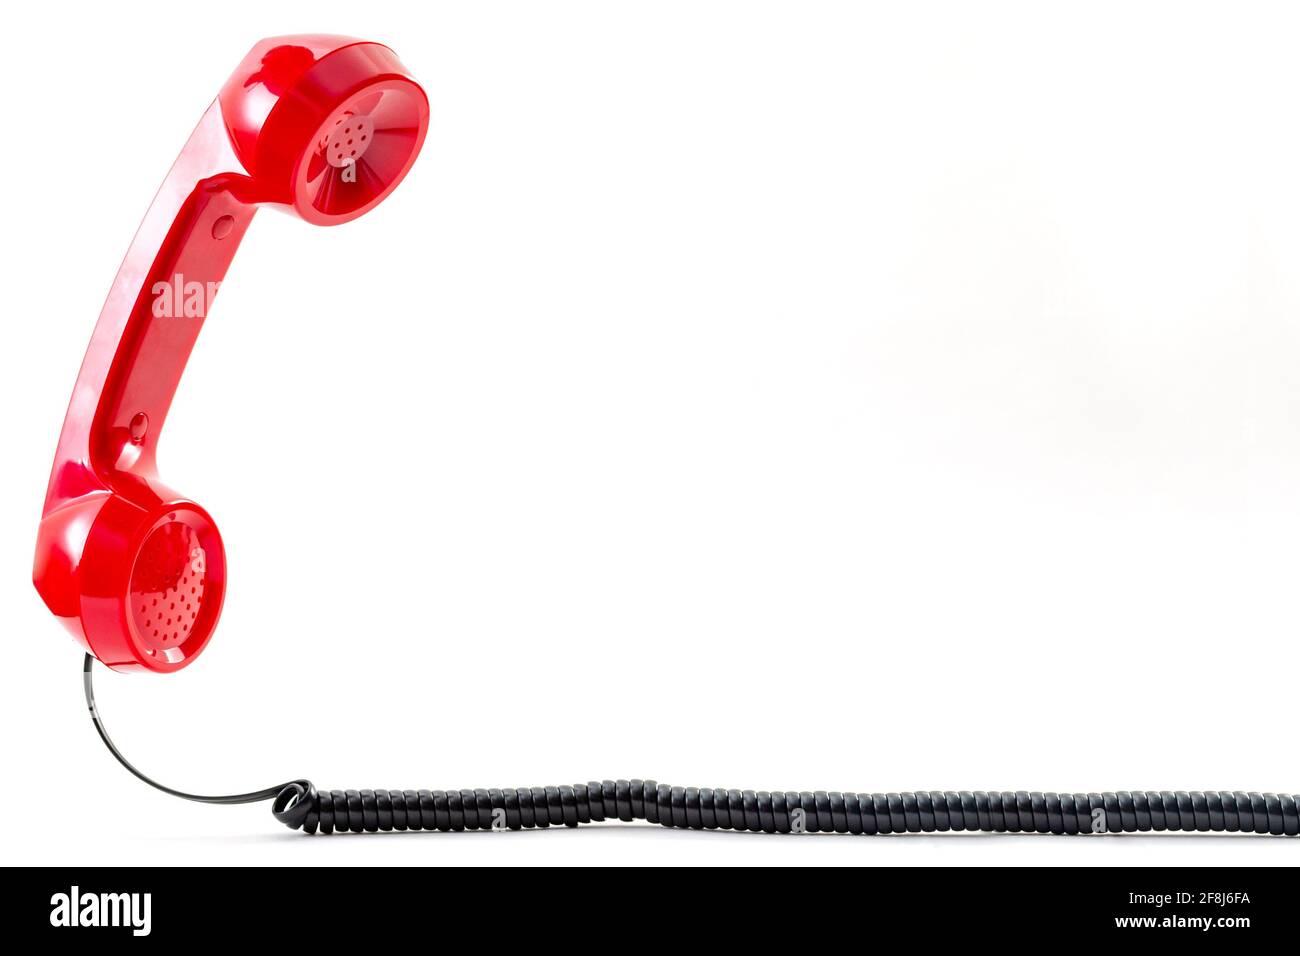 Contact us concept and floating phone receiver with a vintage red telephone handset floating above the curly cable isolated on white background with c Stock Photo